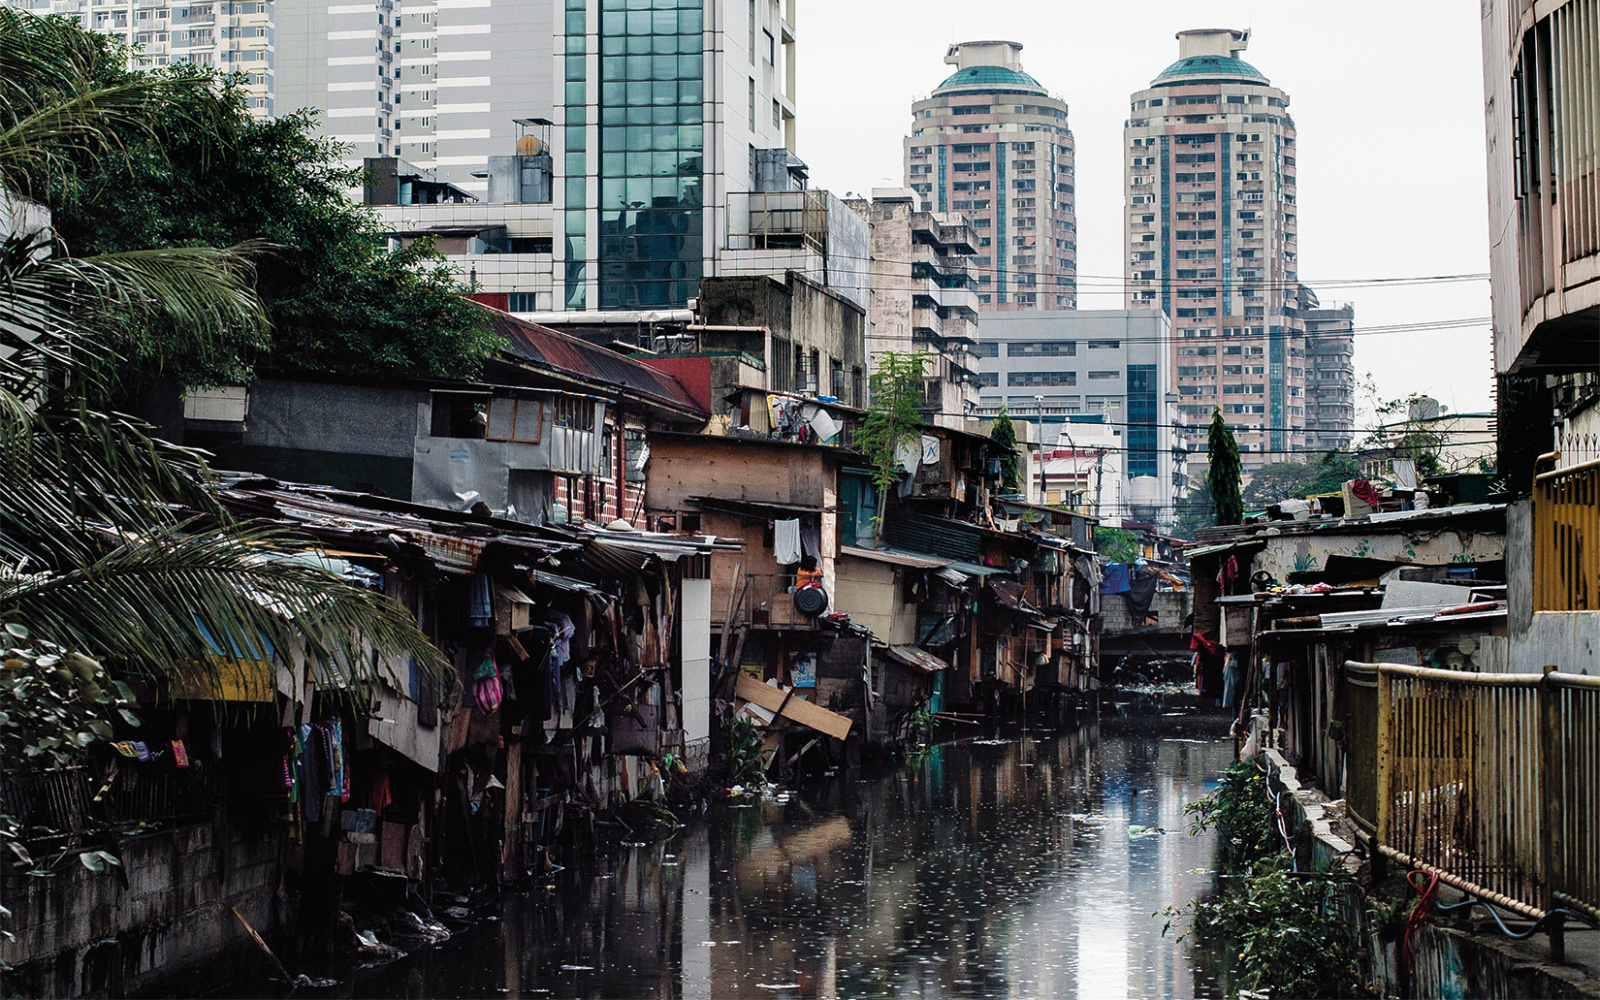 The picture shows dilapidated huts on a dirty river in front of modern high-rise facades. 